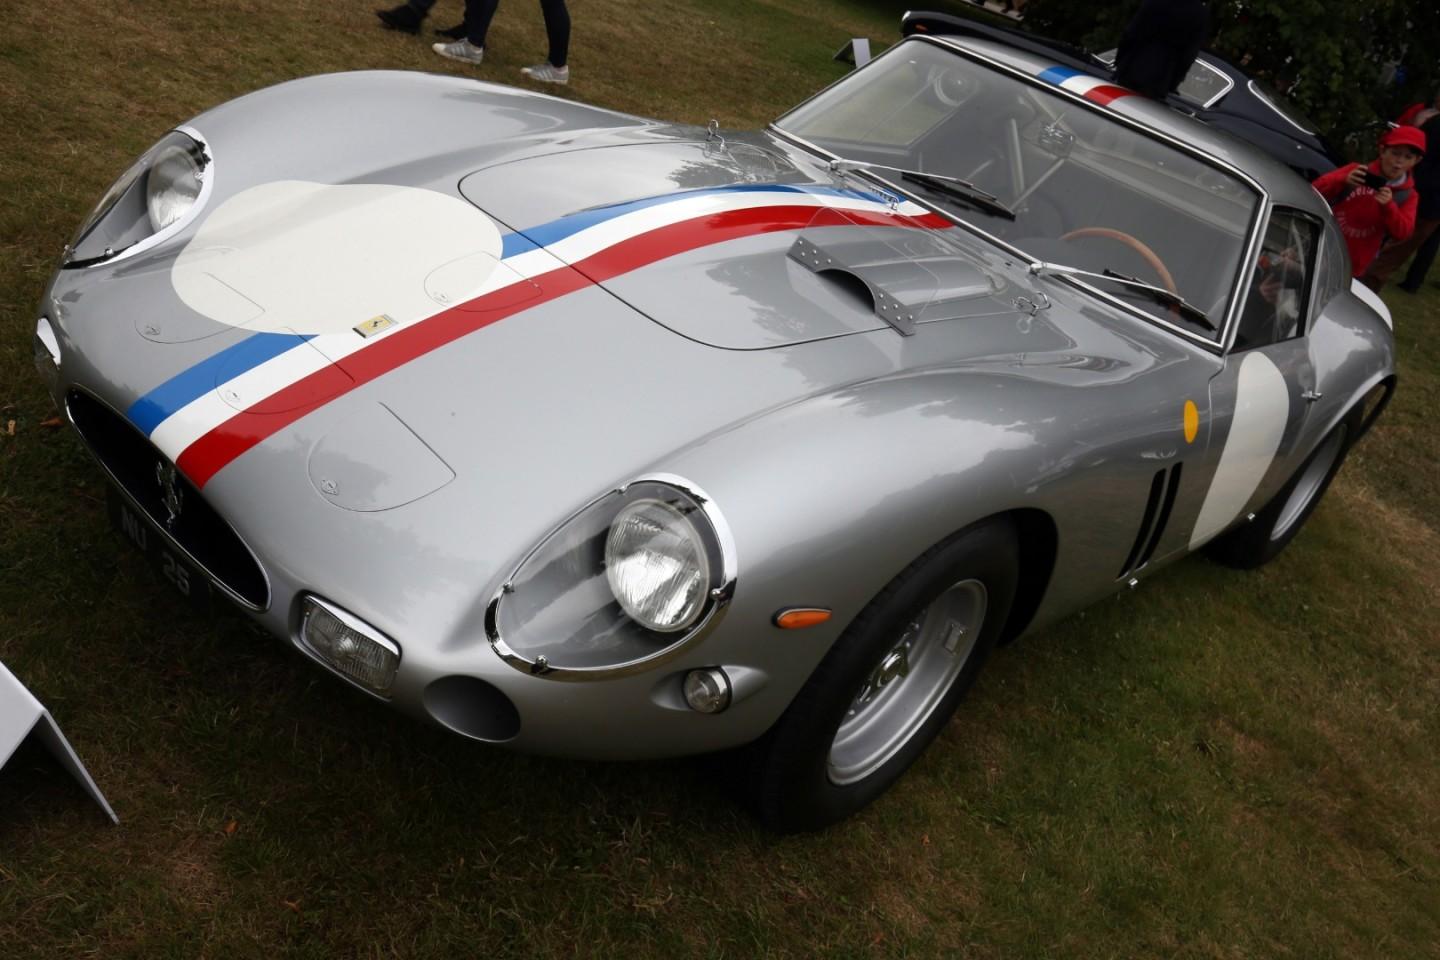 This car, Ferrari 250 GTO #4153GT, is the most expensive car ever to have sold by auction or private treaty.